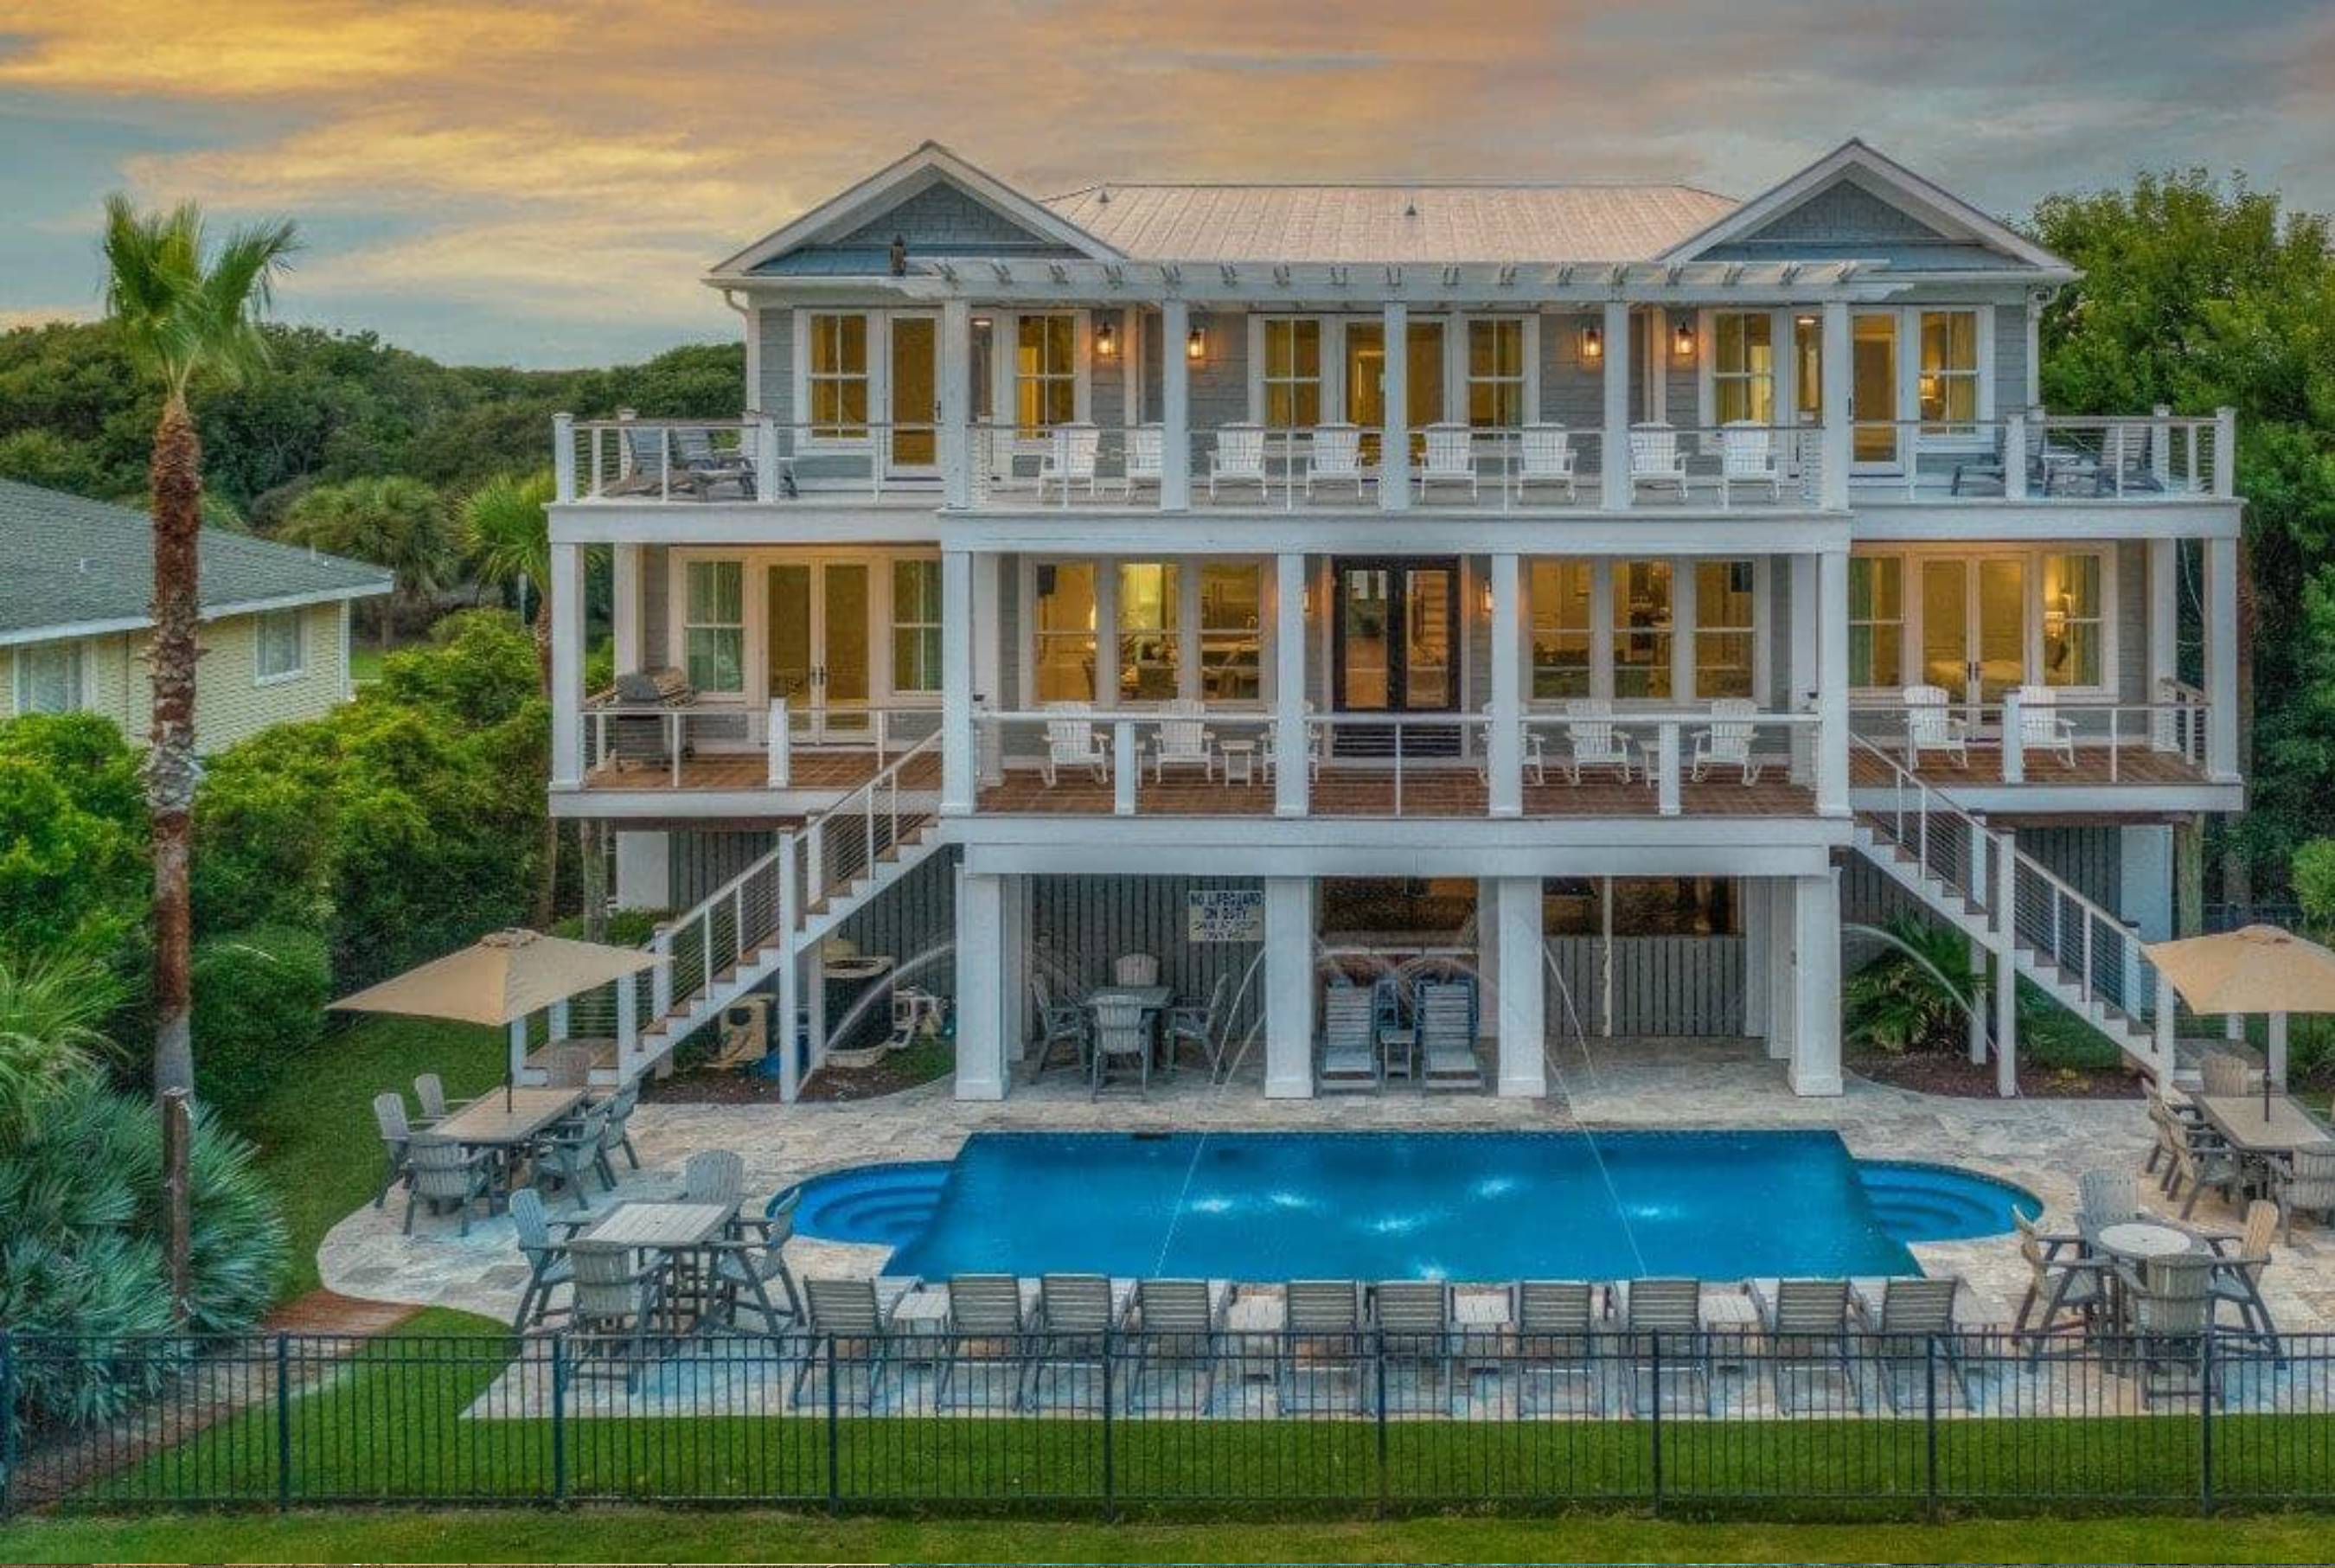 Isle of Palms, South Carolina – "Port of Call" is a grand oceanfront home with a spacious living area and phenomenal views just 30 minutes from Charleston.